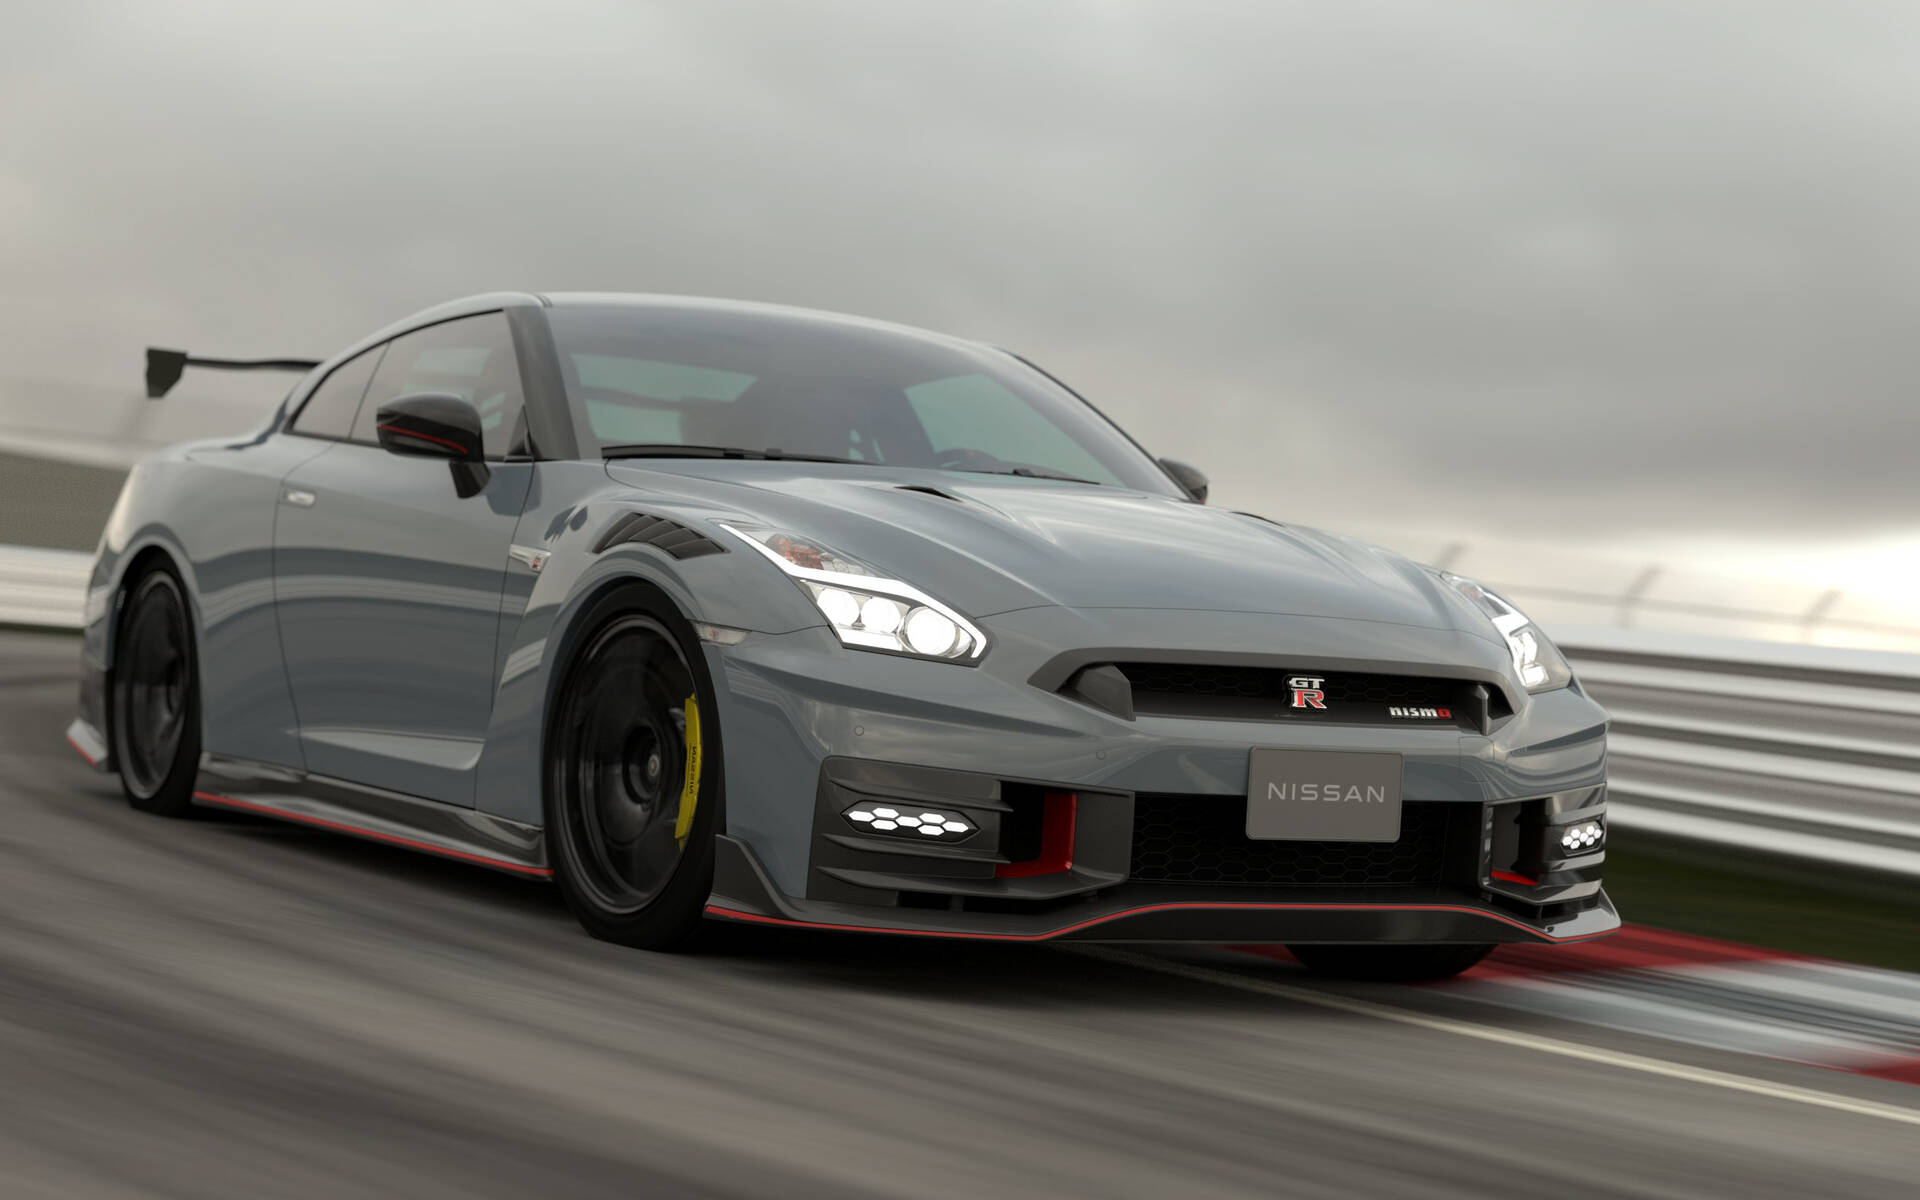 Nissan GT-R Nismo: Performance Car of the Year 2018 4th Place